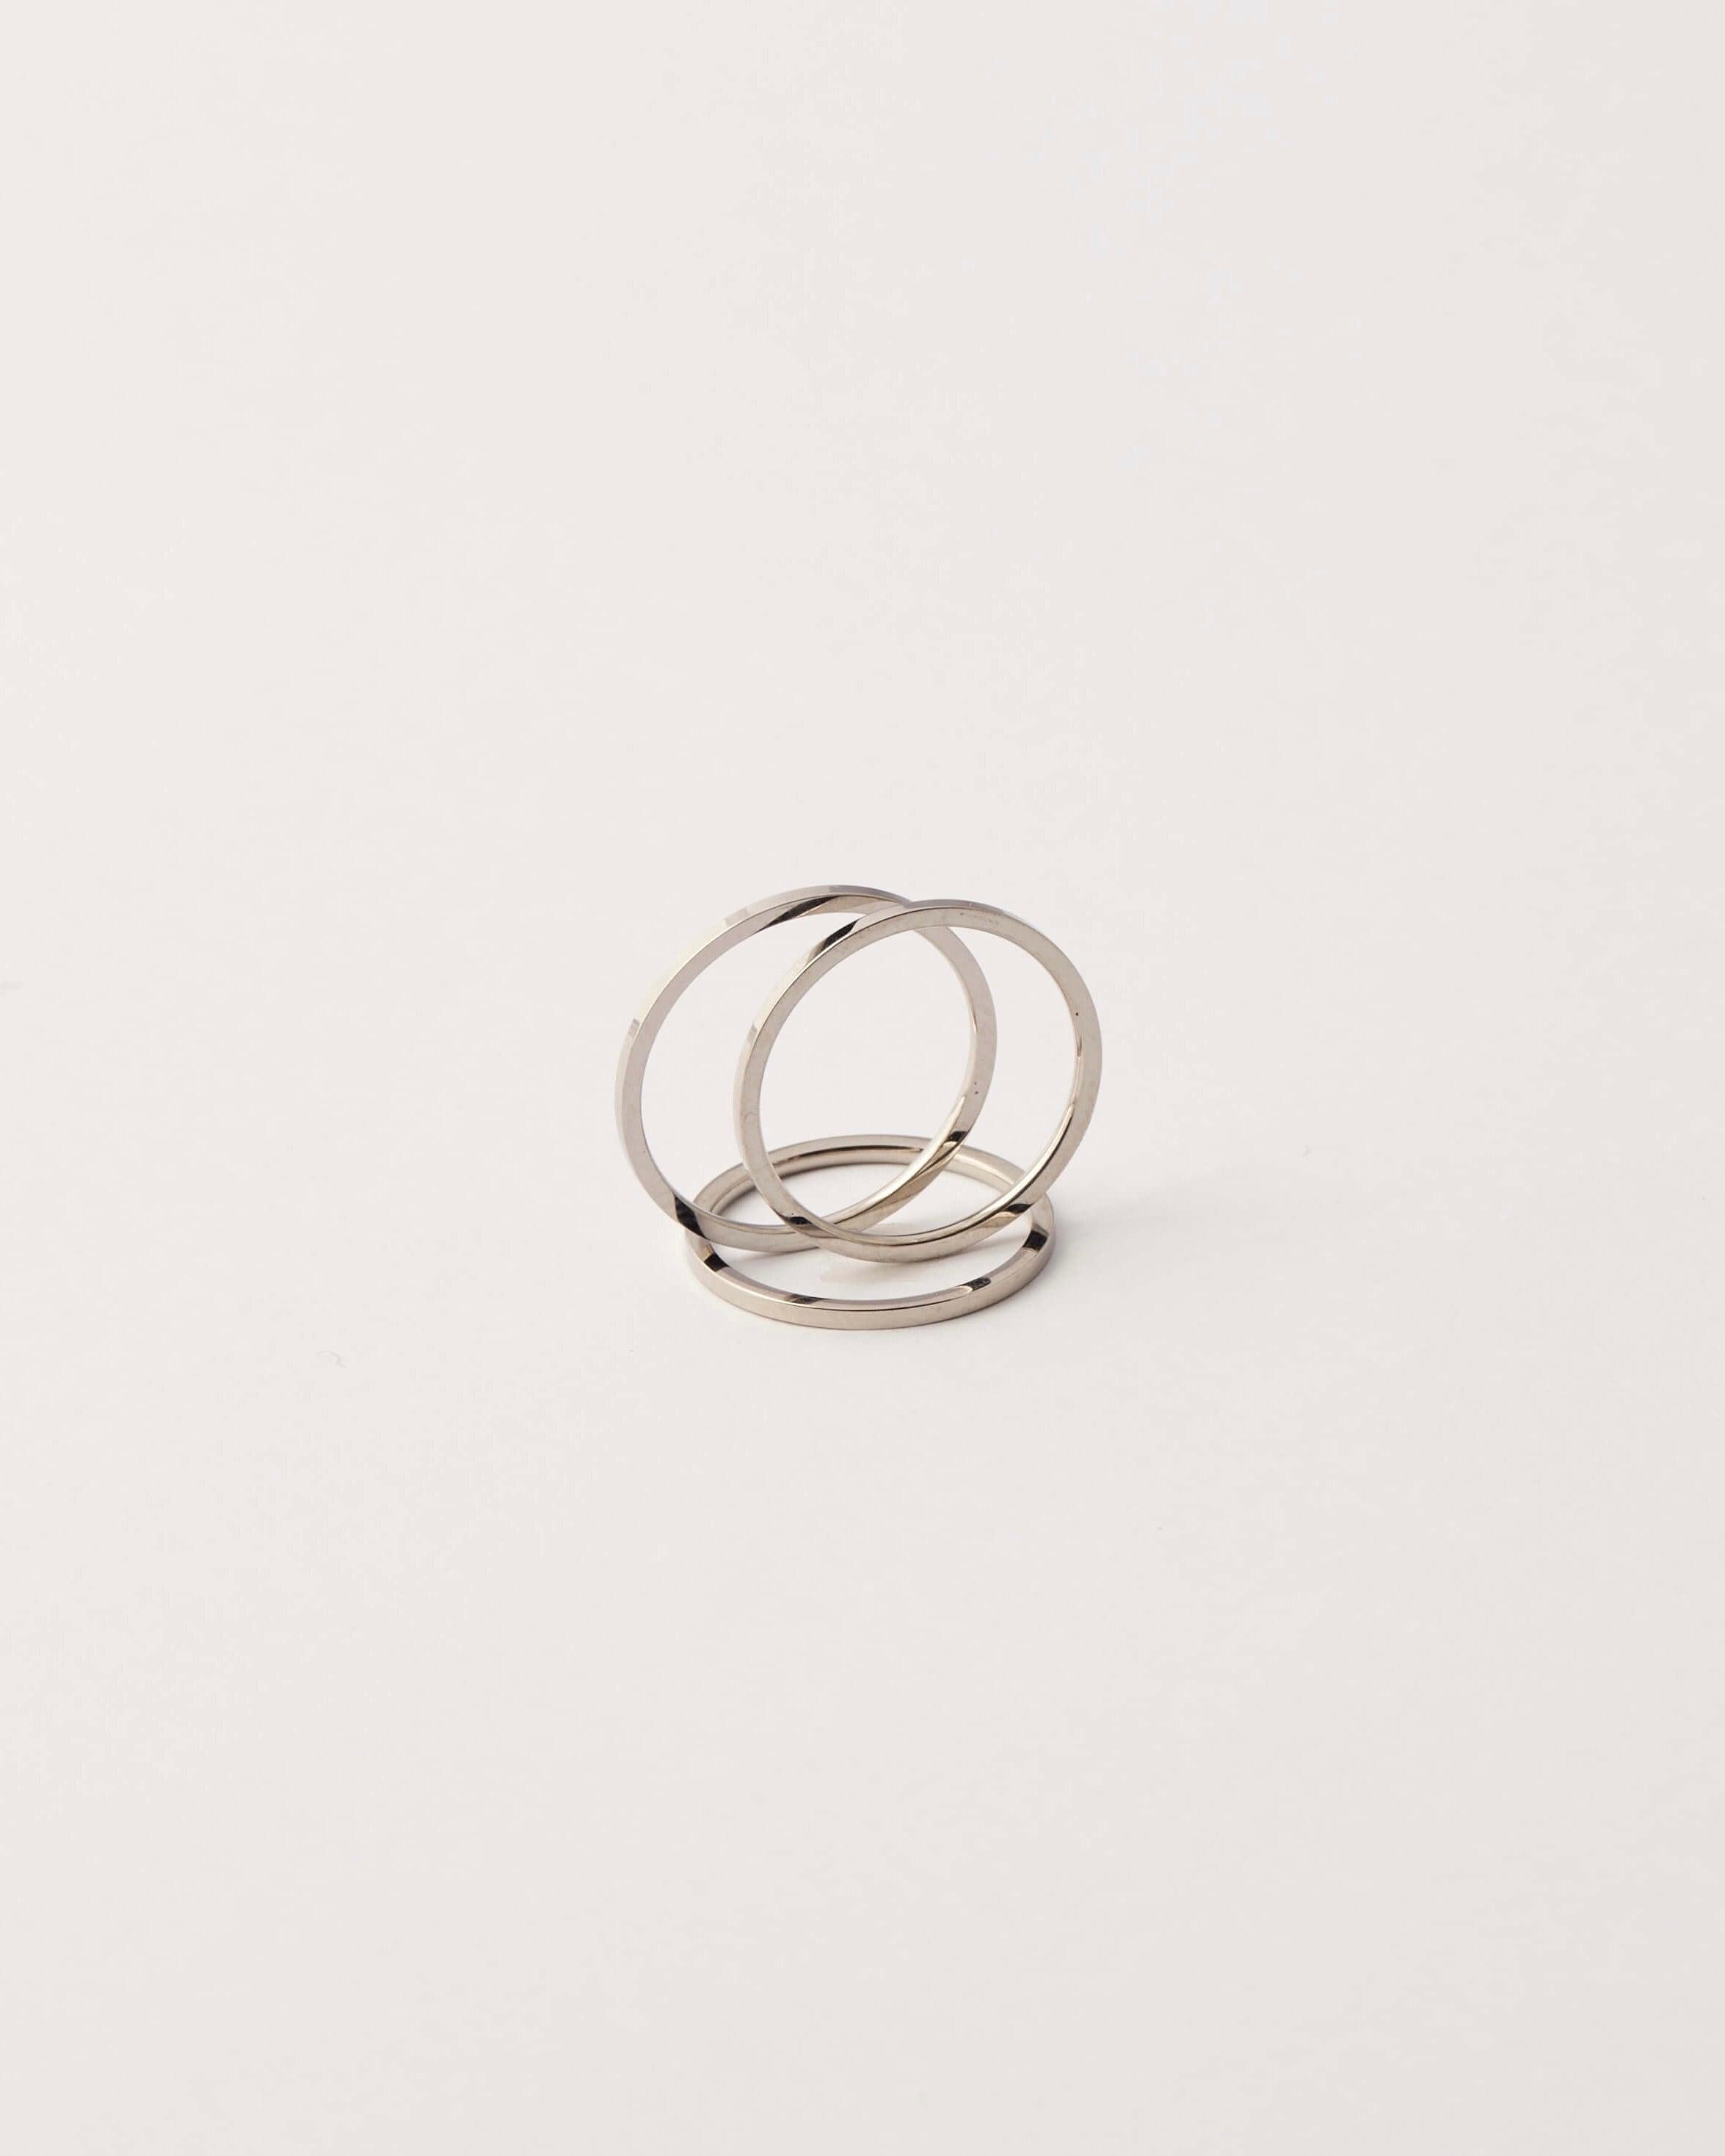 RIPPLES RING - LIMELY